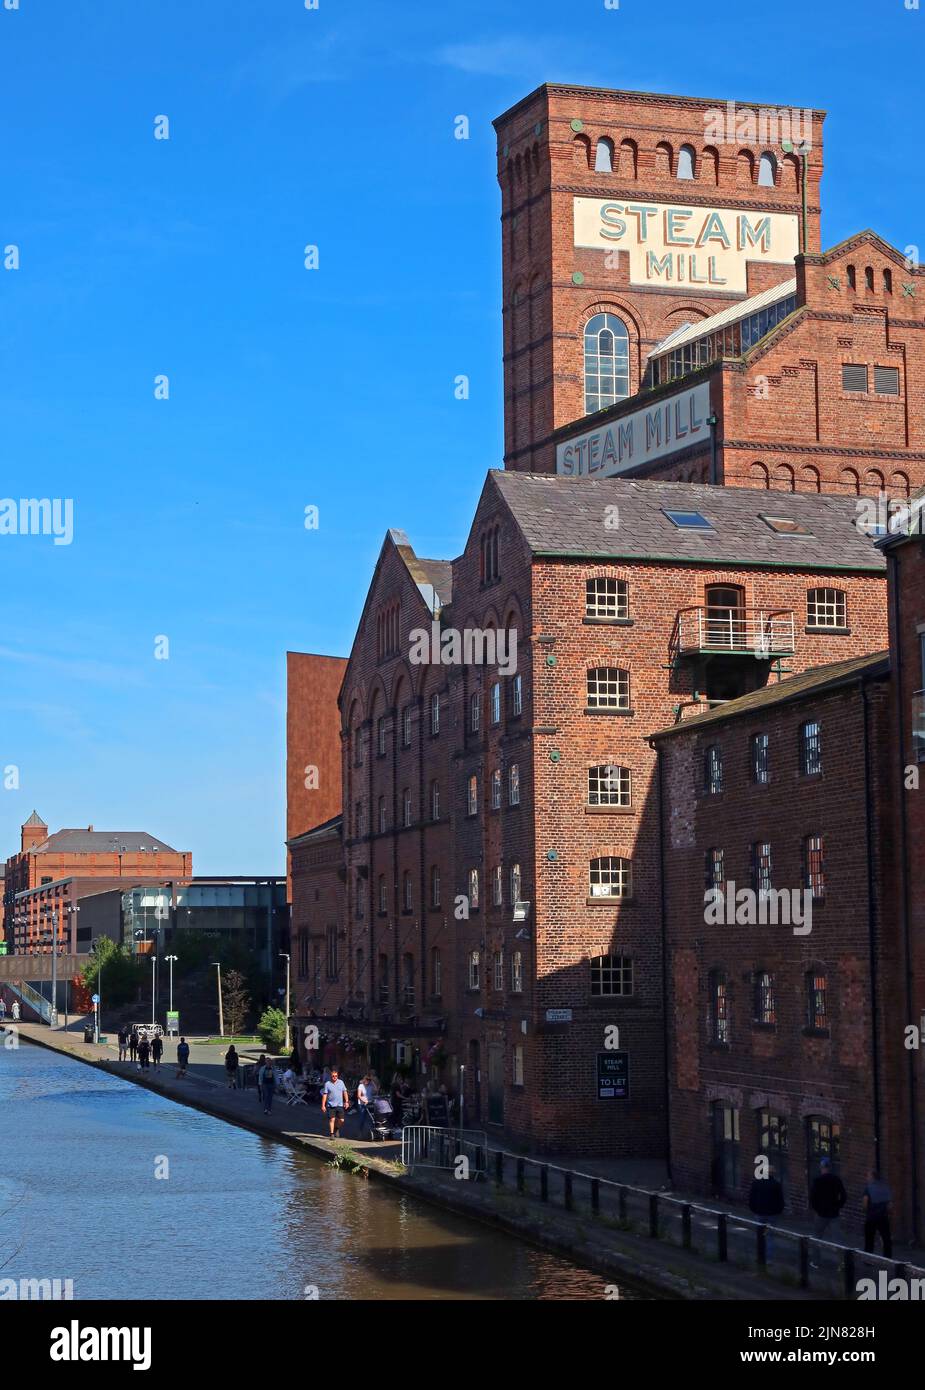 Steam Mill, canalside, alongside the Shropshire Union canal, Chester city centre, Cheshire, England, UK, CH3 5AN Stock Photo